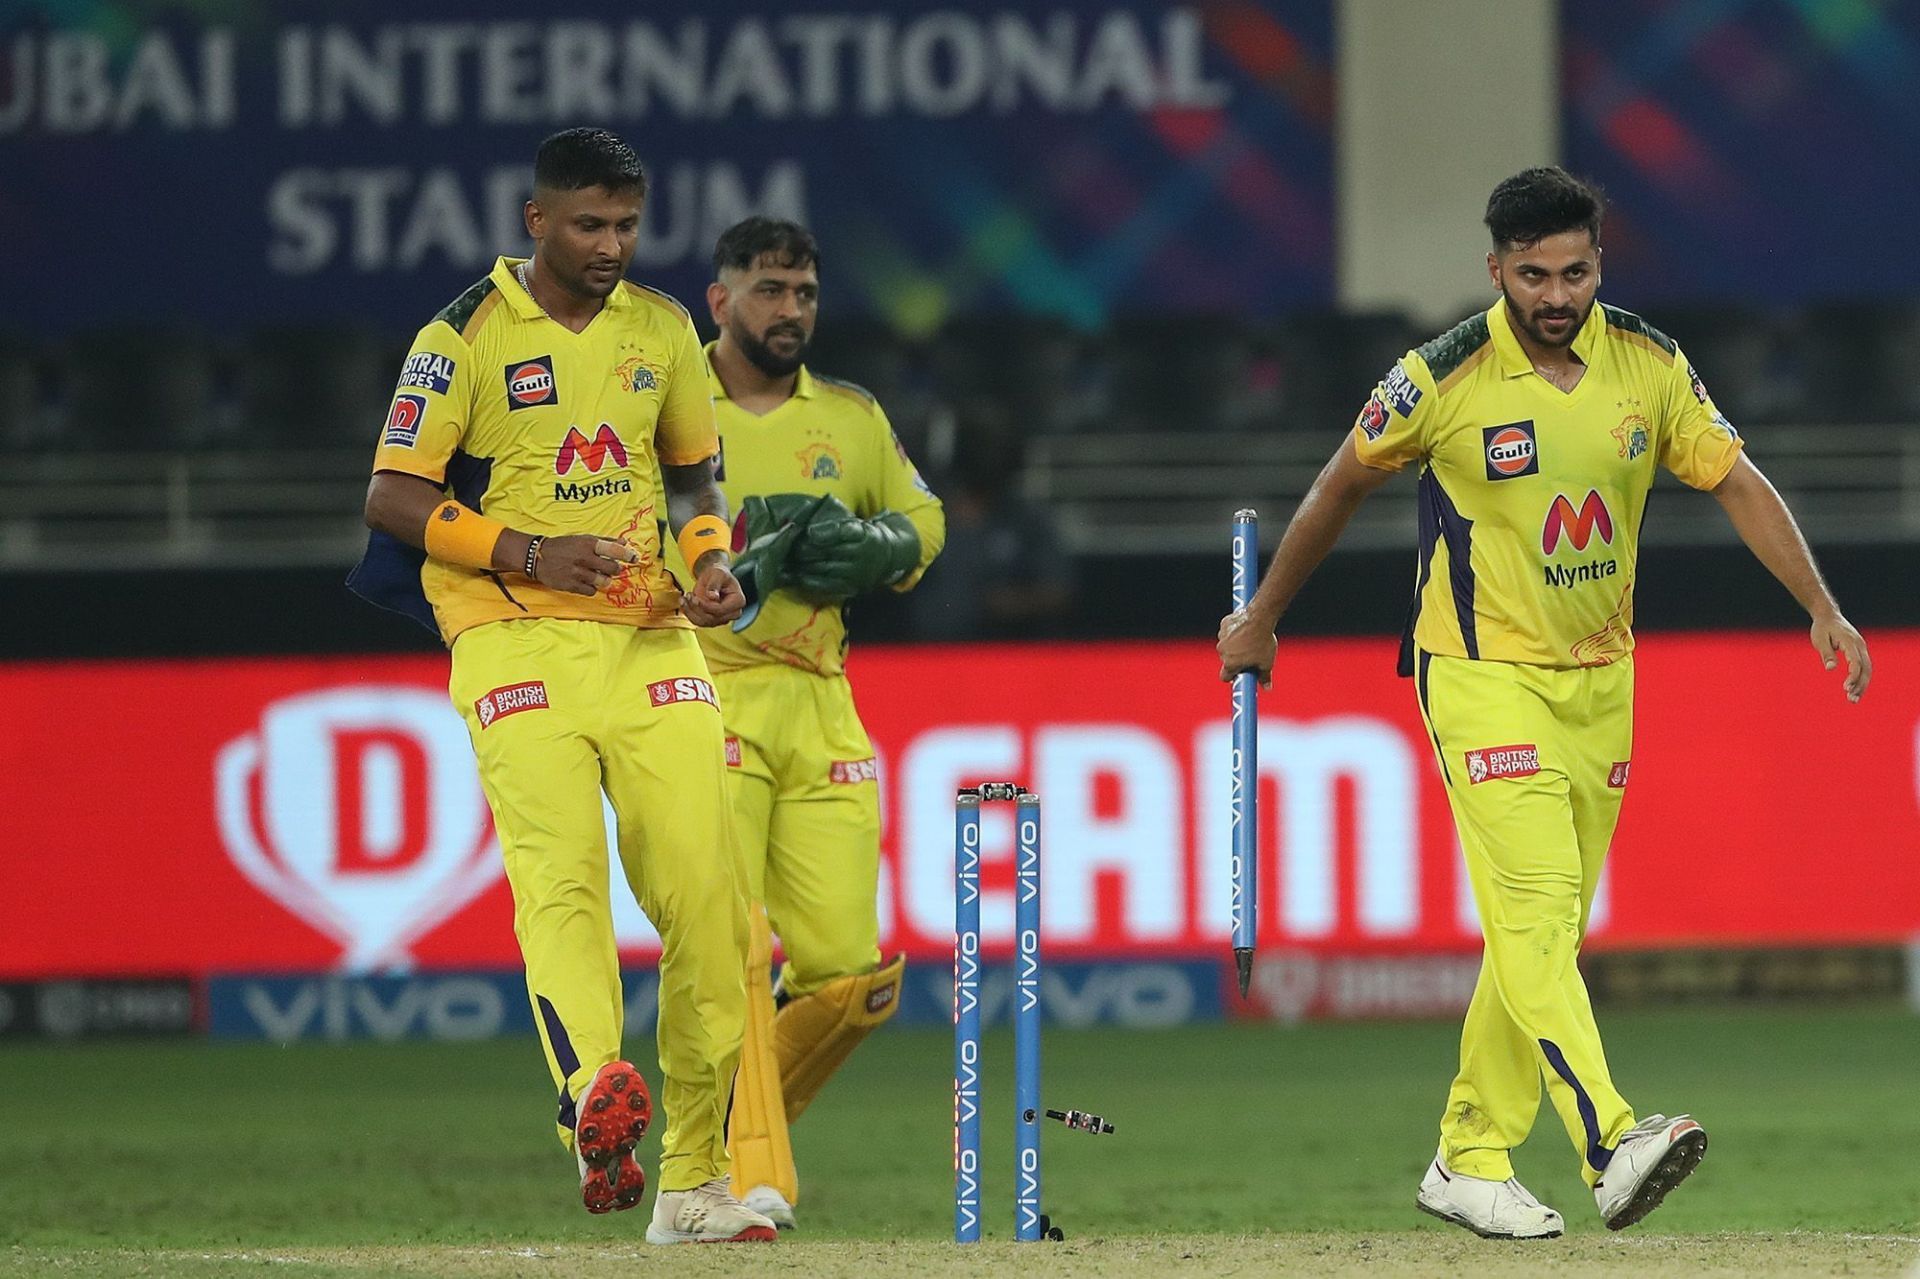 Shardul Thakur (extreme right) was the leading wicket-taker for Chennai Super Kings in IPL 2021 (Image Courtesy: IPLT20.com)